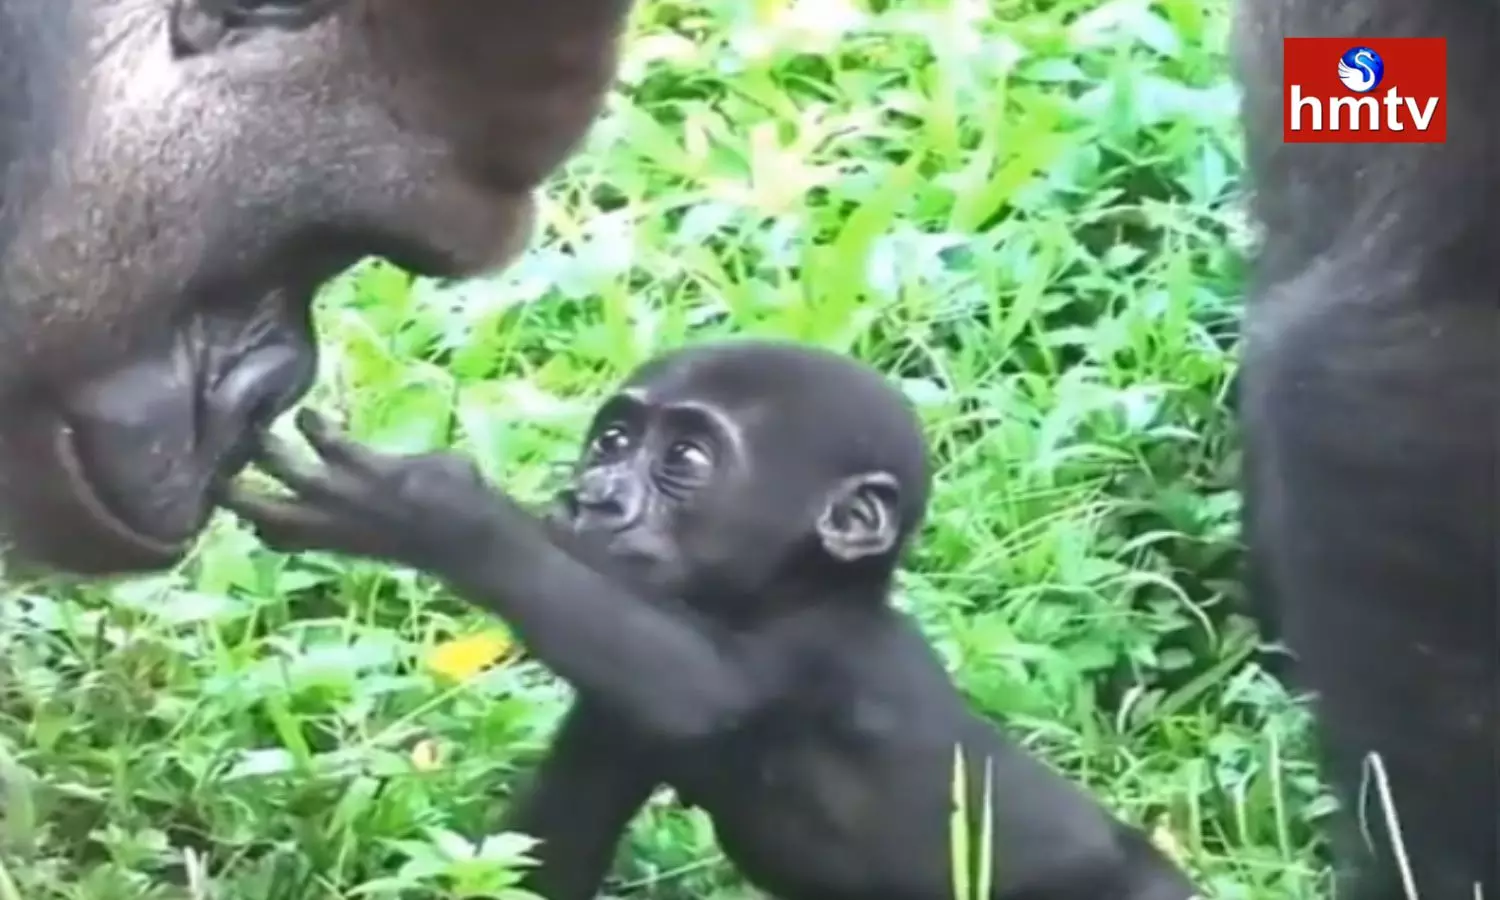 Baby Gorilla Meets Father Gorilla For The First Time Video Gone Viral